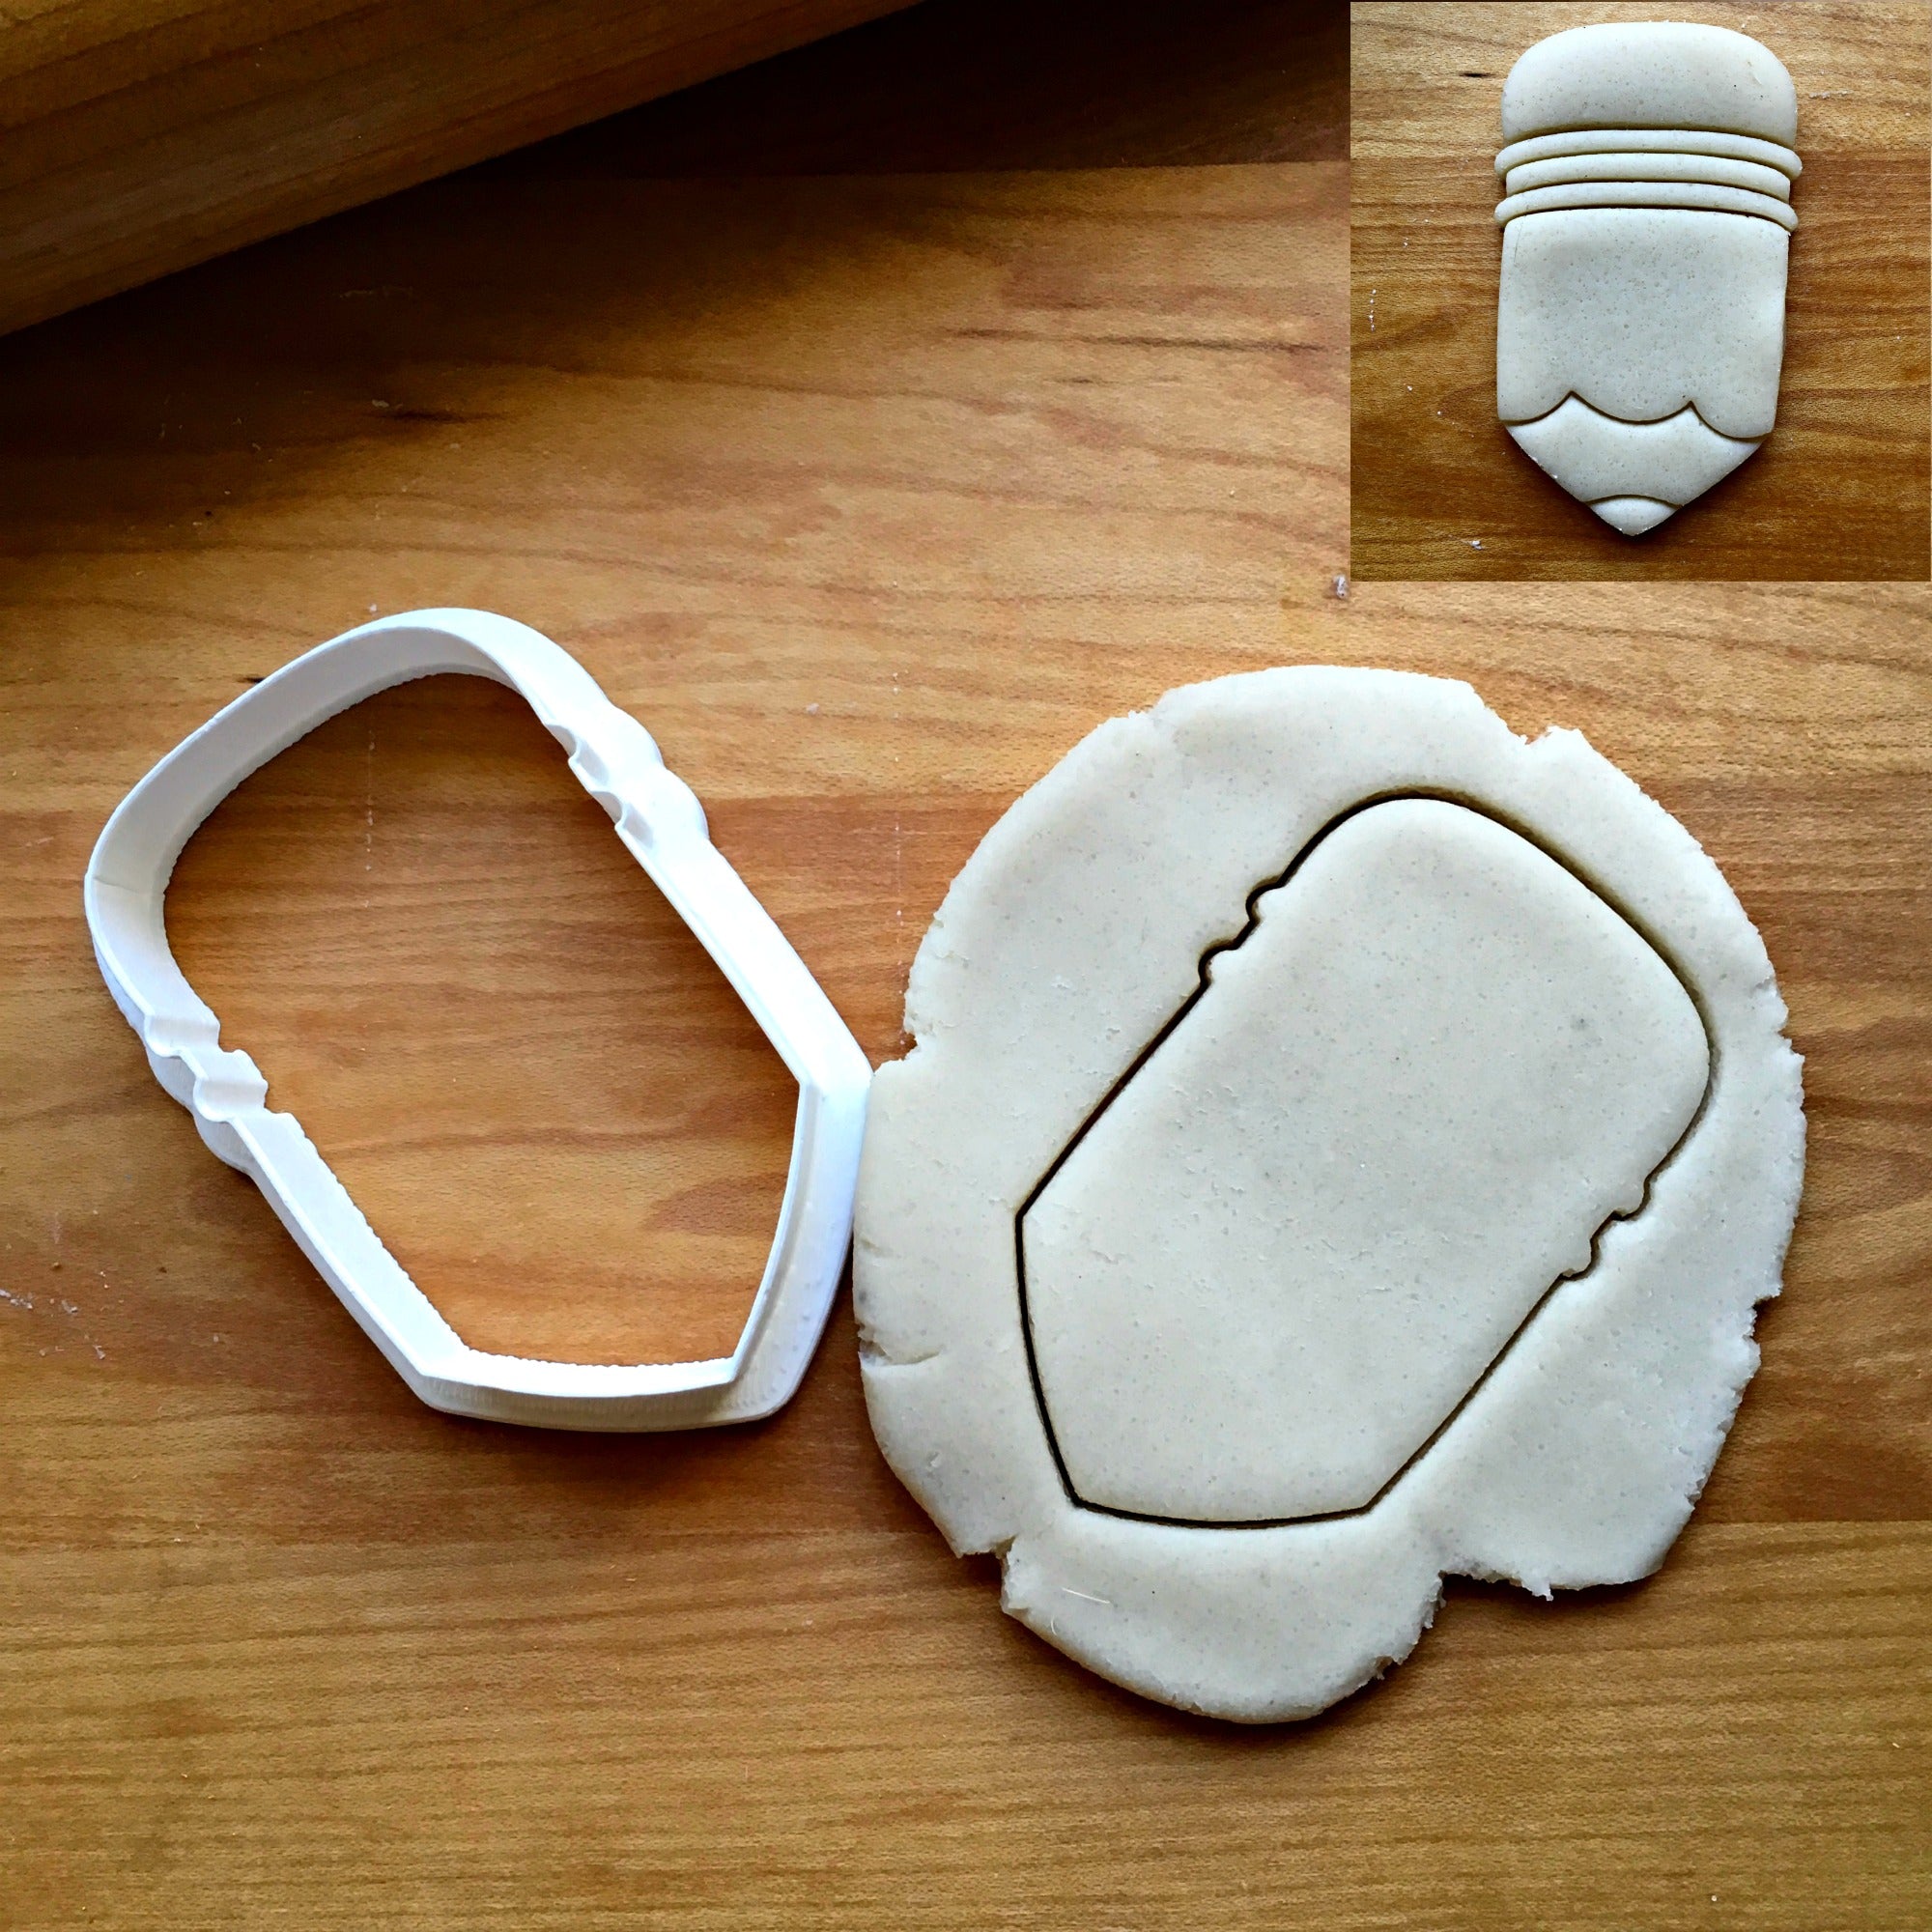 Chubby Pencil Cookie Cutter/Dishwasher Safe